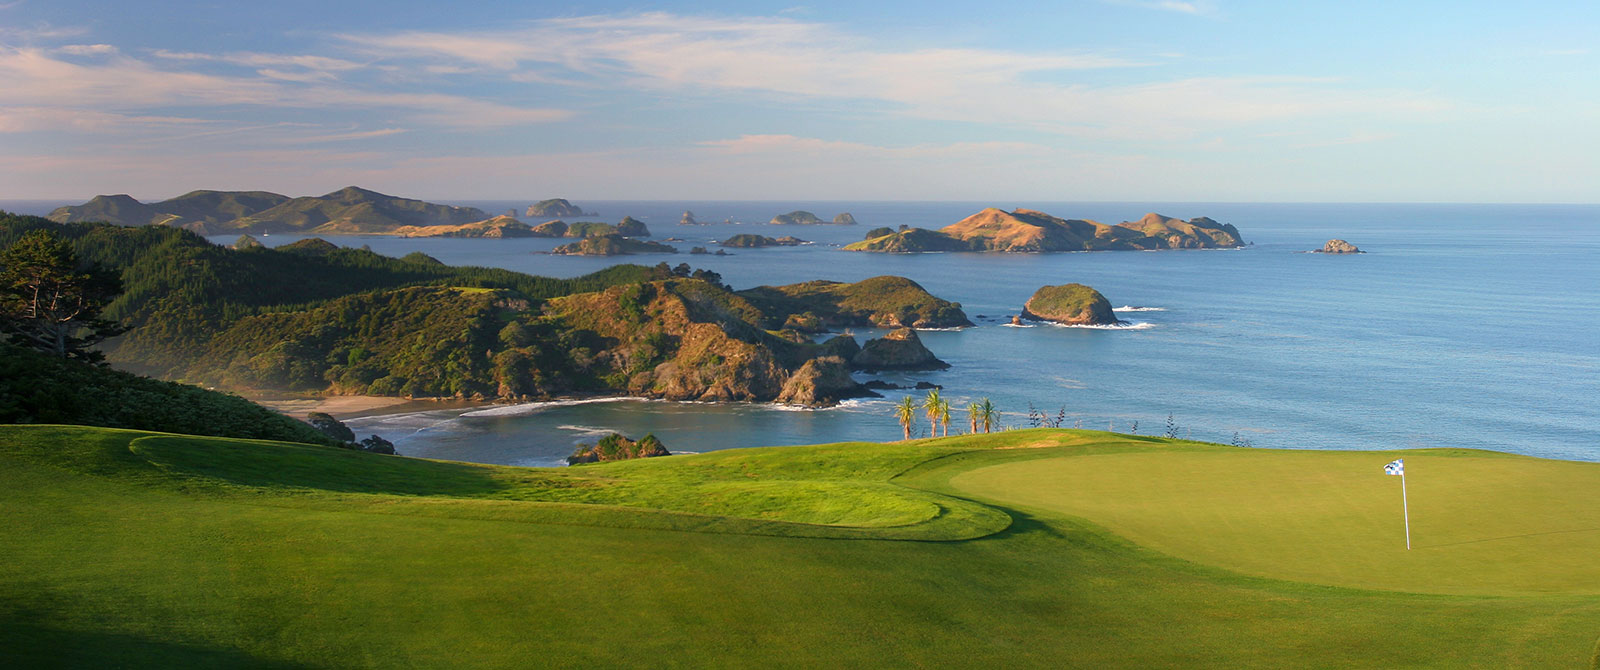 Kauri Cliffs Golf Course, Bay of Islands - Book Your Trip to New Zealand - New Zealand Travel Agency